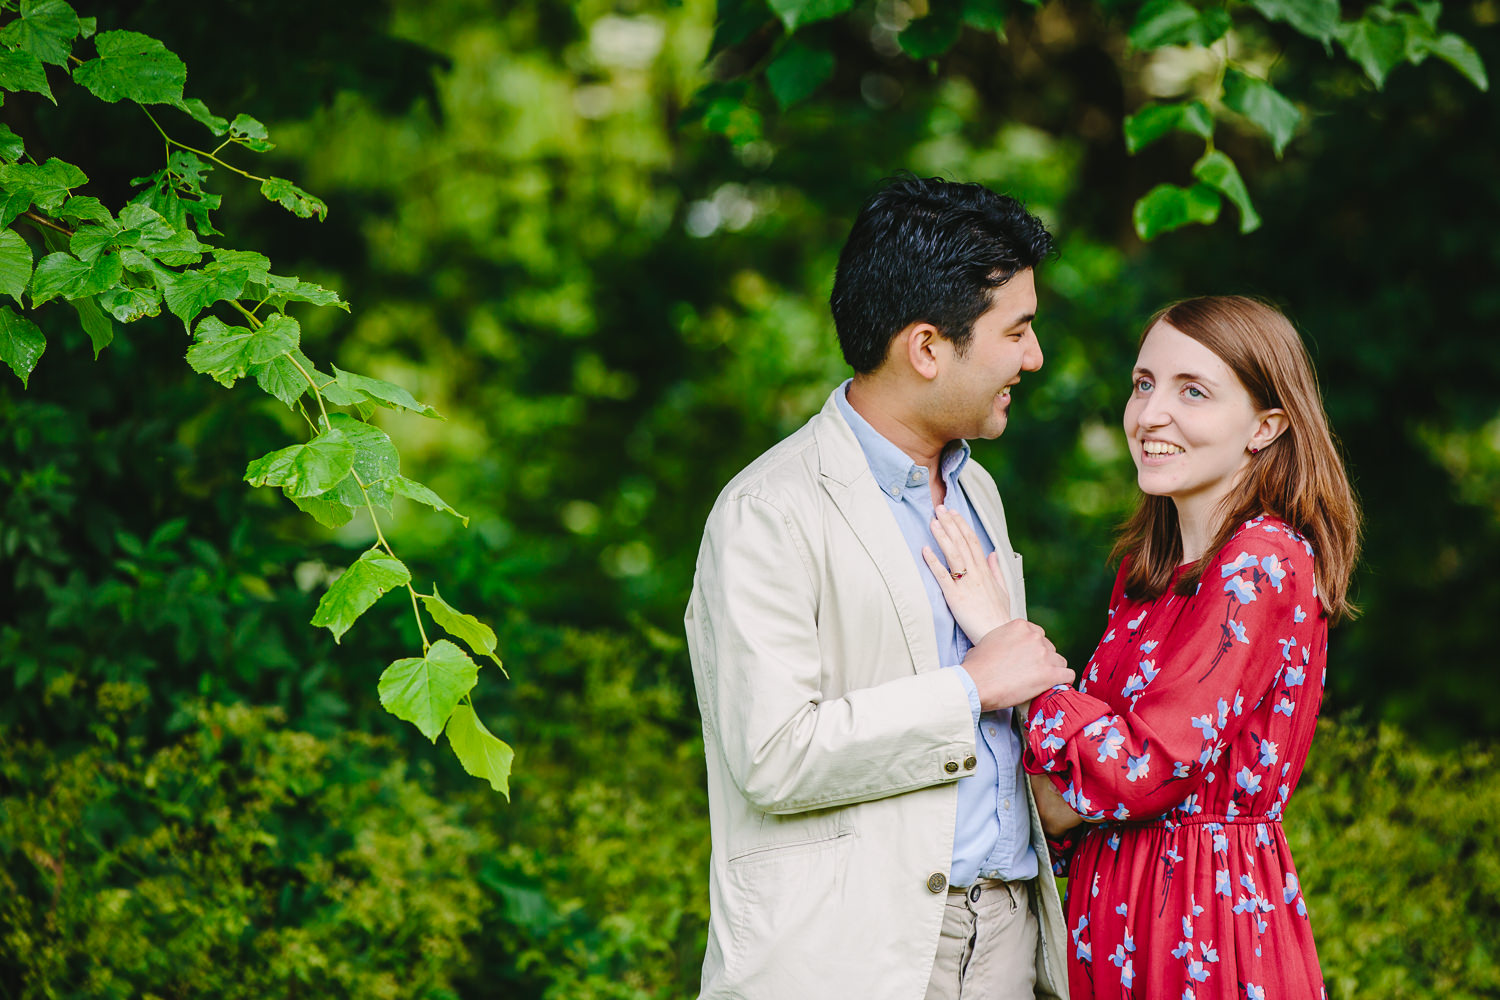 Engaged couple in Ely, photographed by Ely Photographer. Trees and greenery.